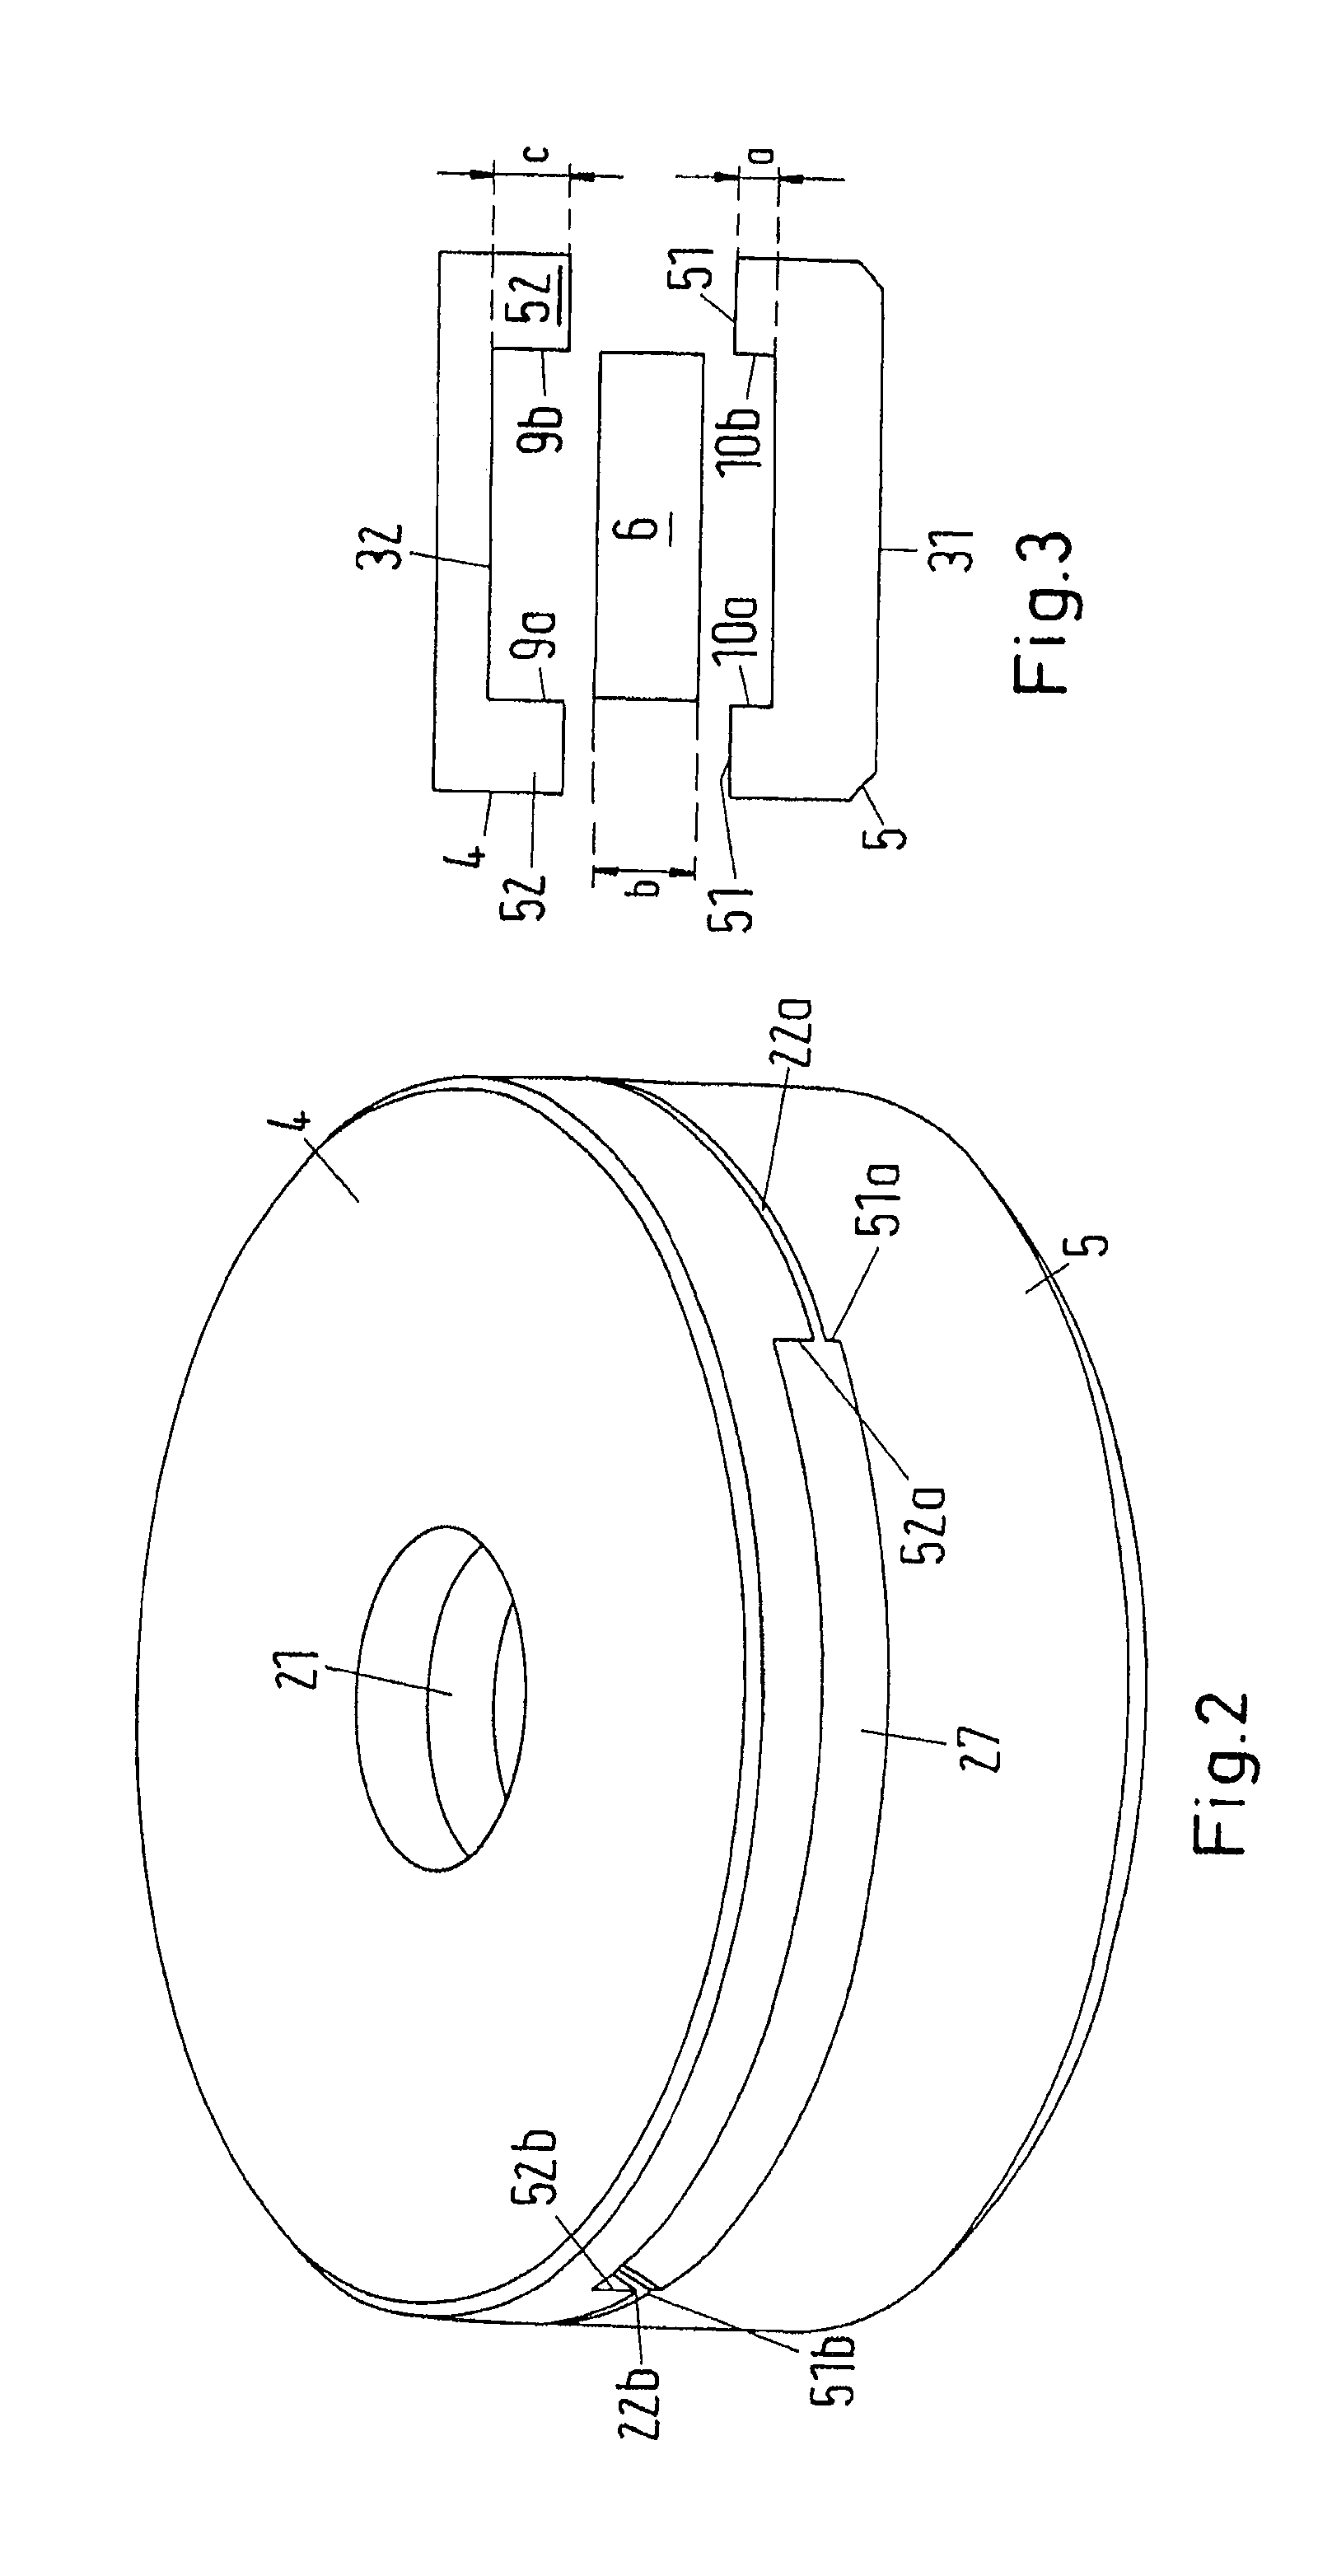 Electrically contacting an electrical component